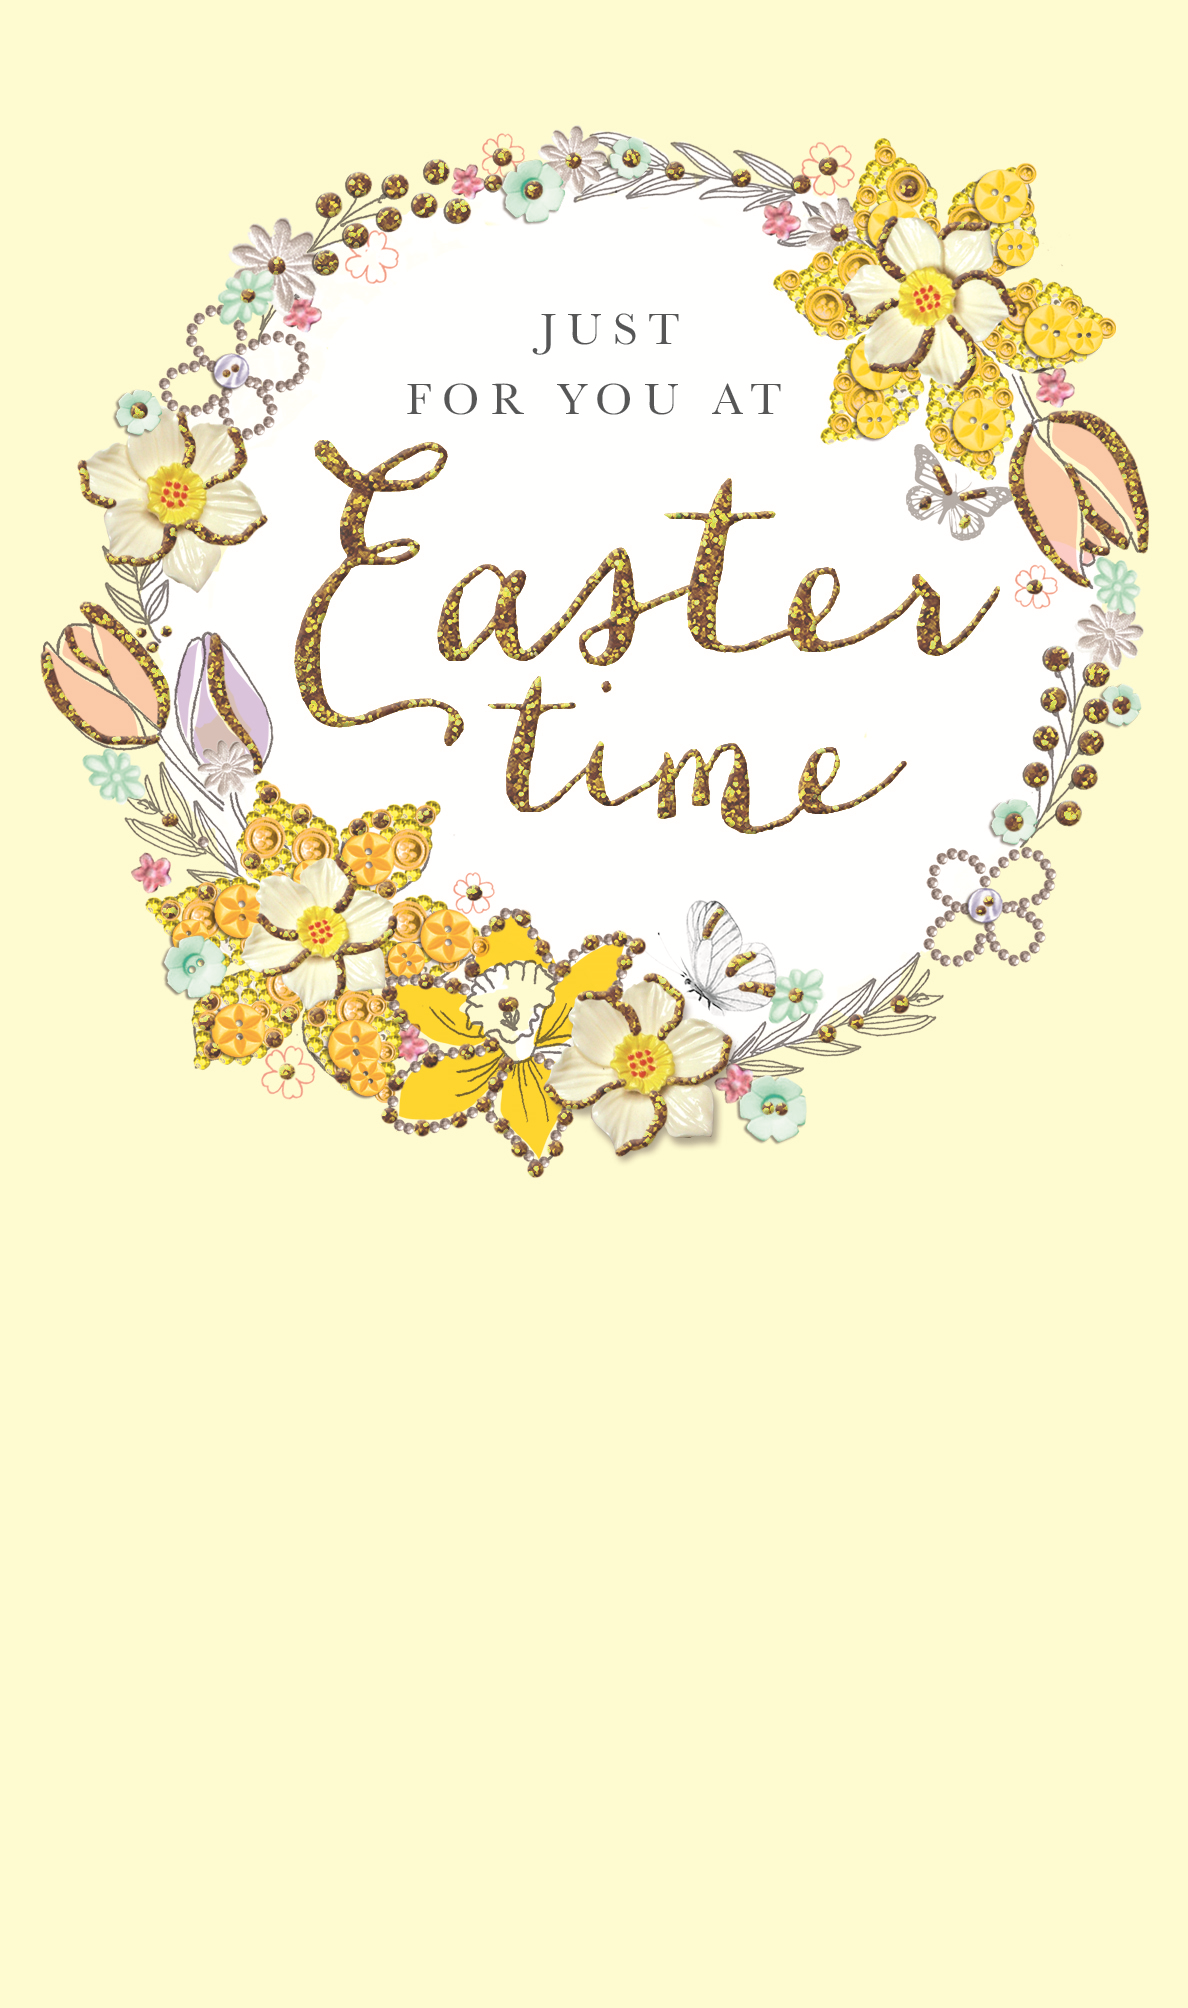 Just For You At Easter Time Money Wallet Easter Greeting Card